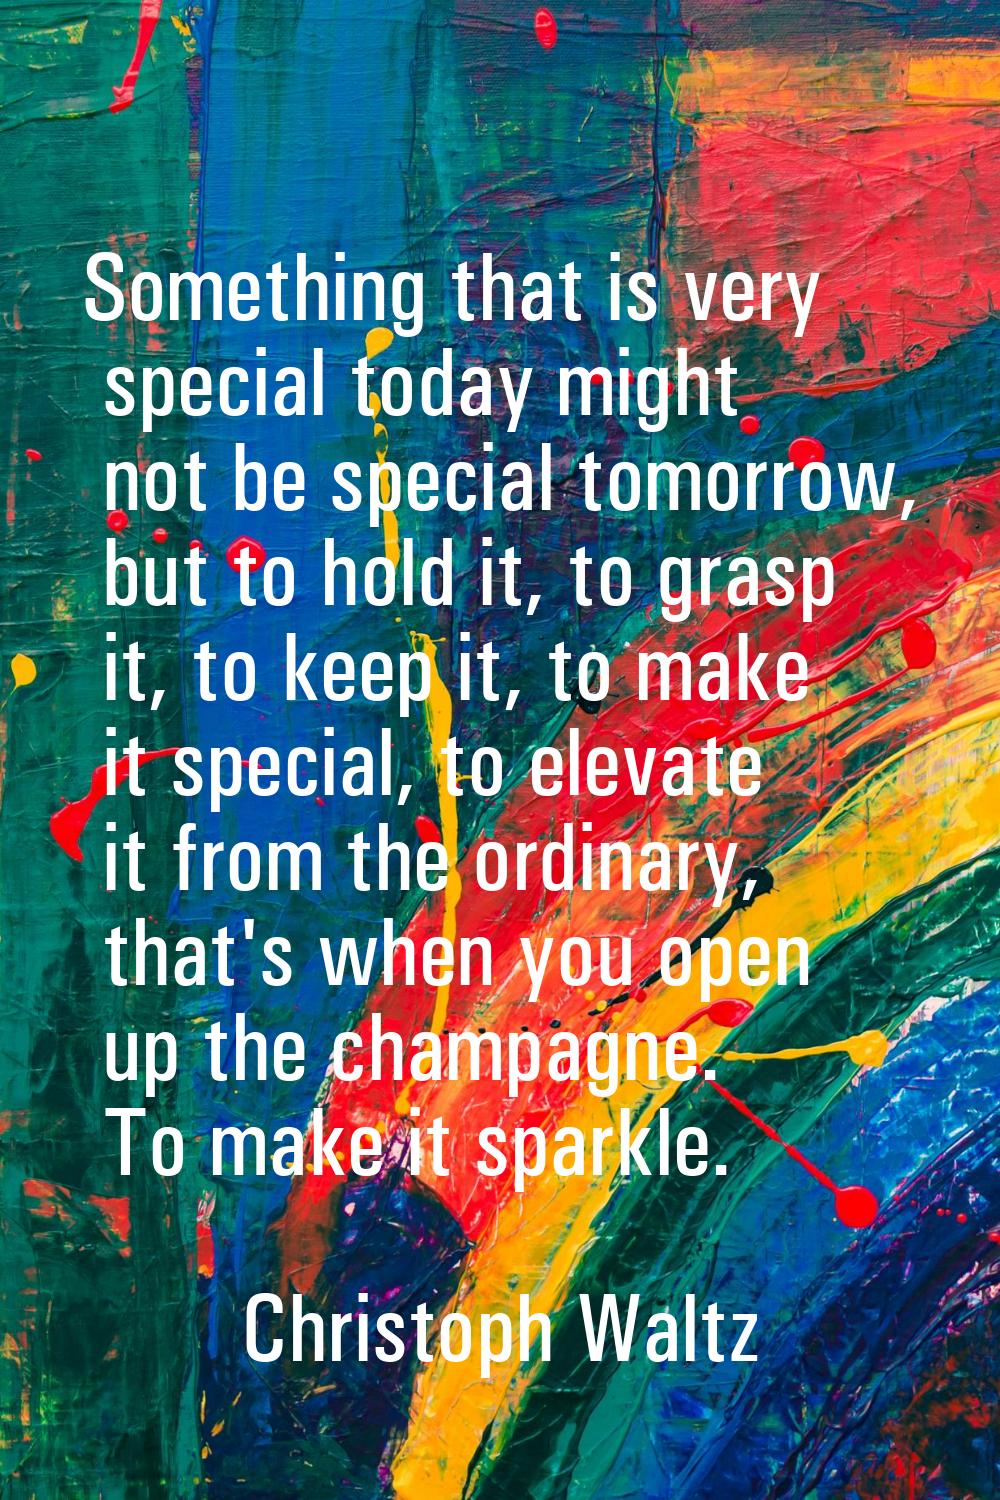 Something that is very special today might not be special tomorrow, but to hold it, to grasp it, to